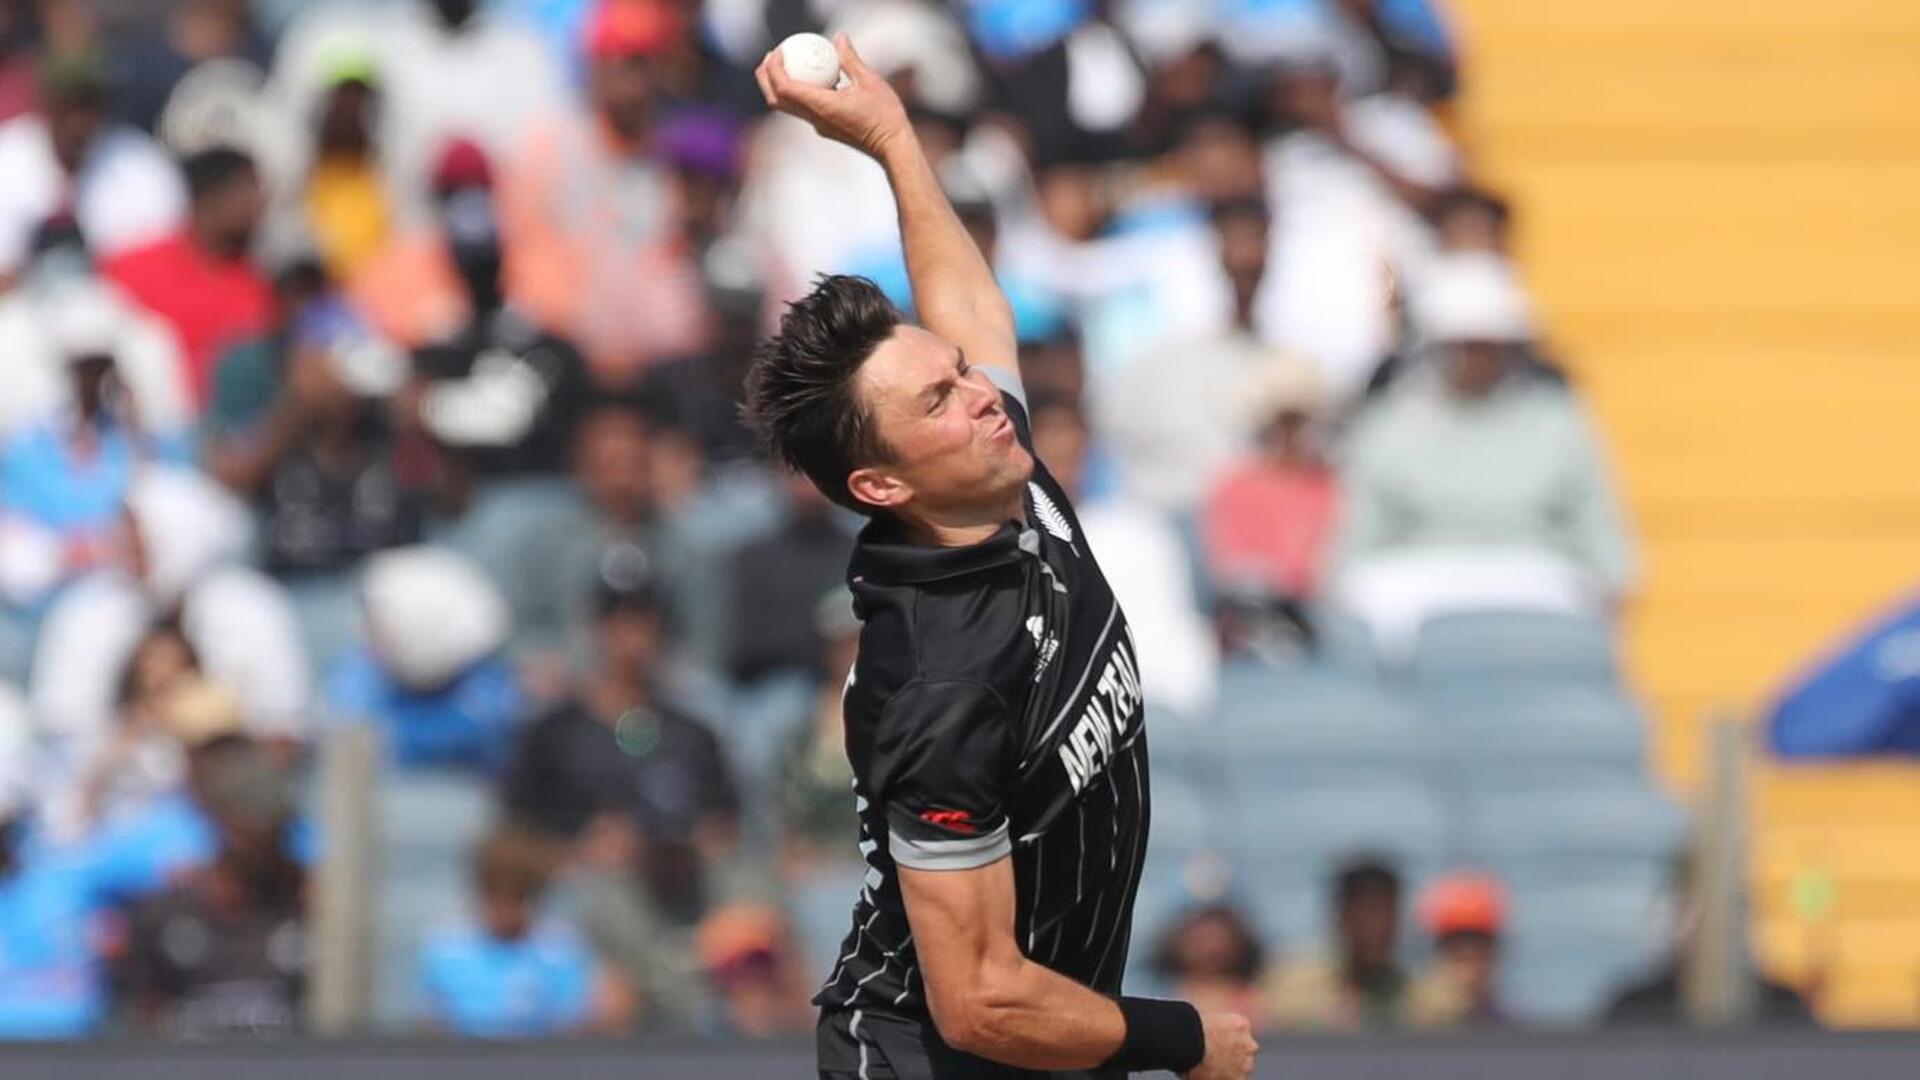 Trent Boult completes 50 ODI World Cup wickets: Key stats